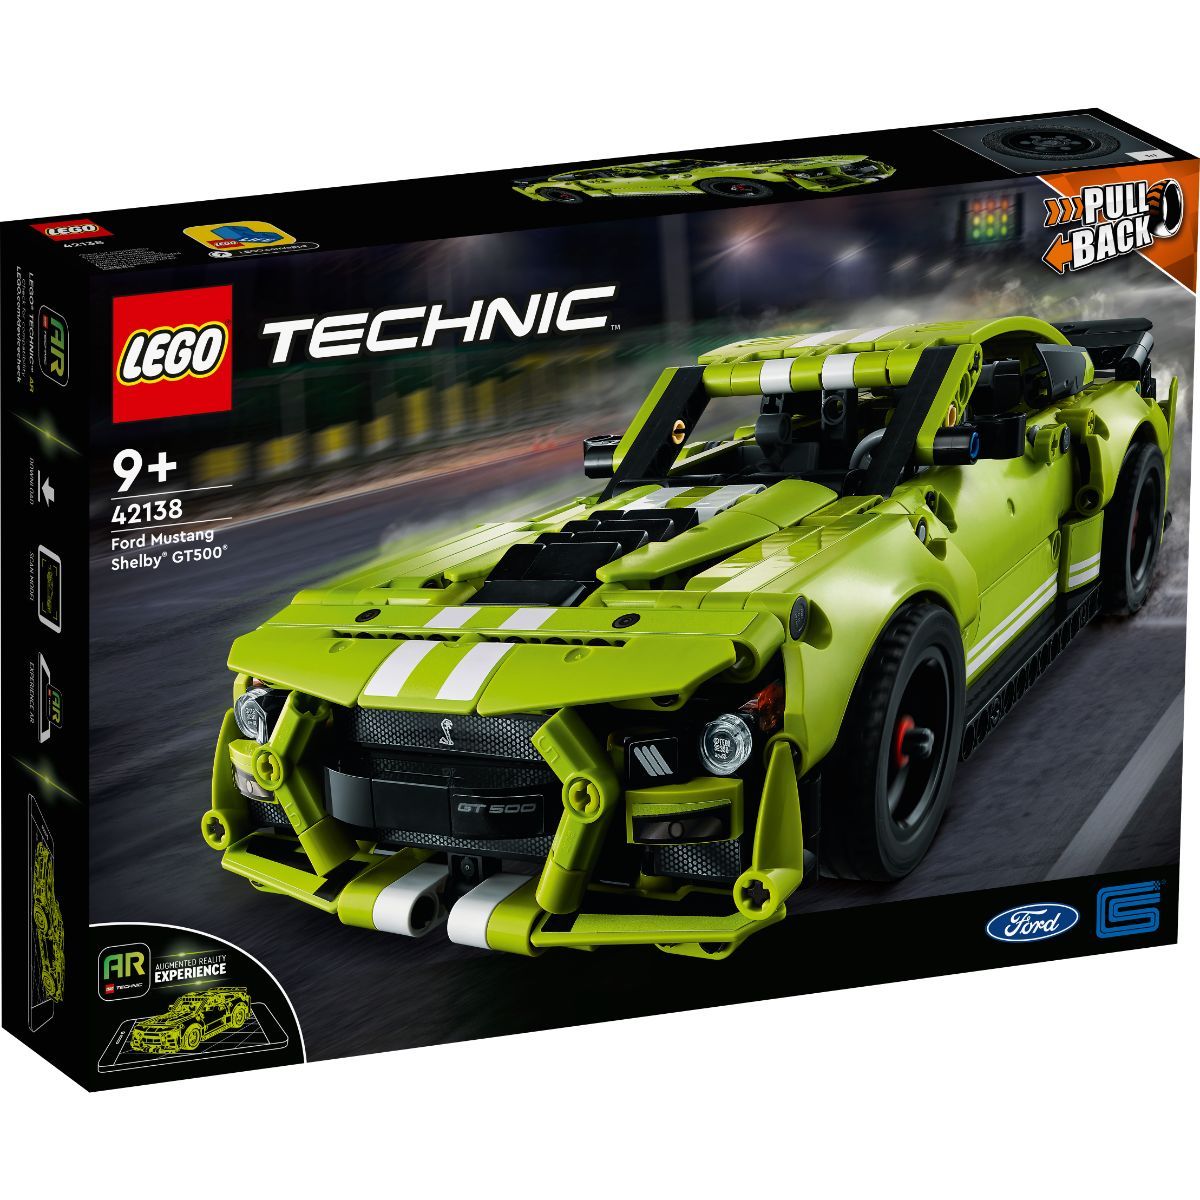 LEGO® Technic – Ford Mustang Shelby Gt500 (42138) LEGO® imagine noua